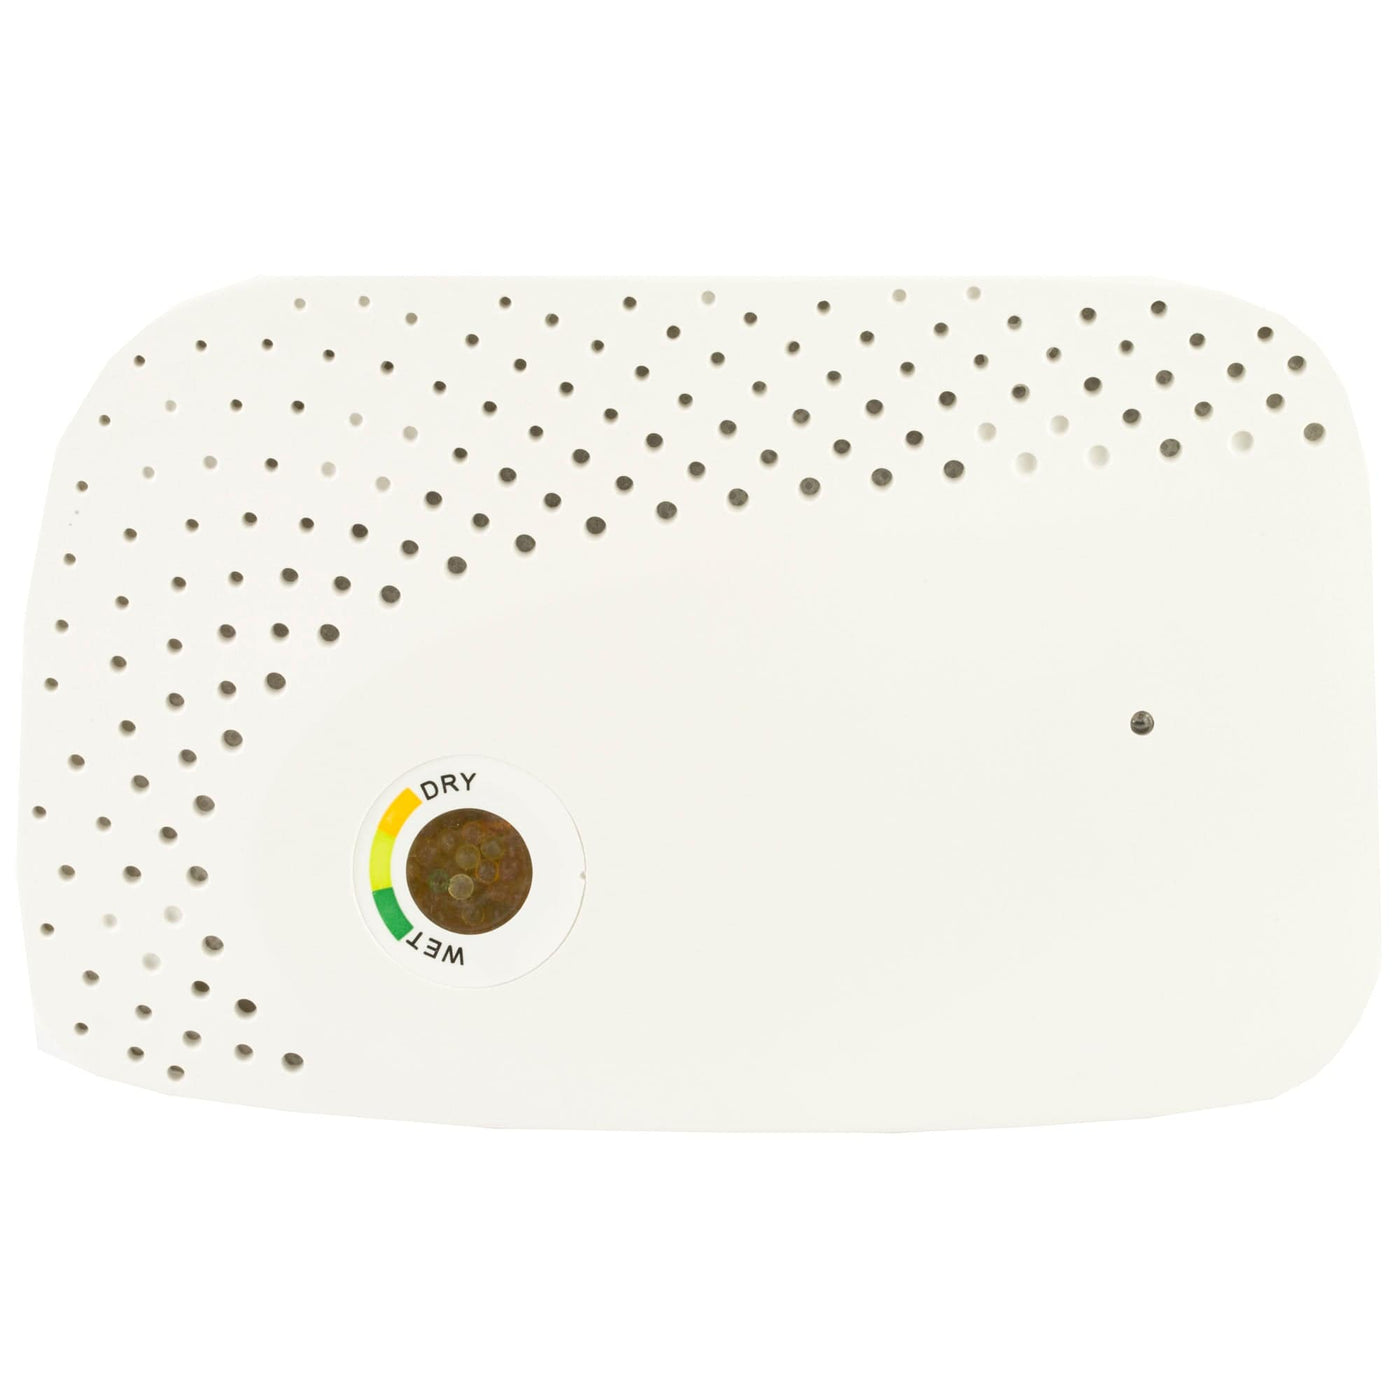 SnapSafe Snapsafe Dehumidifier Med Recharge Safes/Security